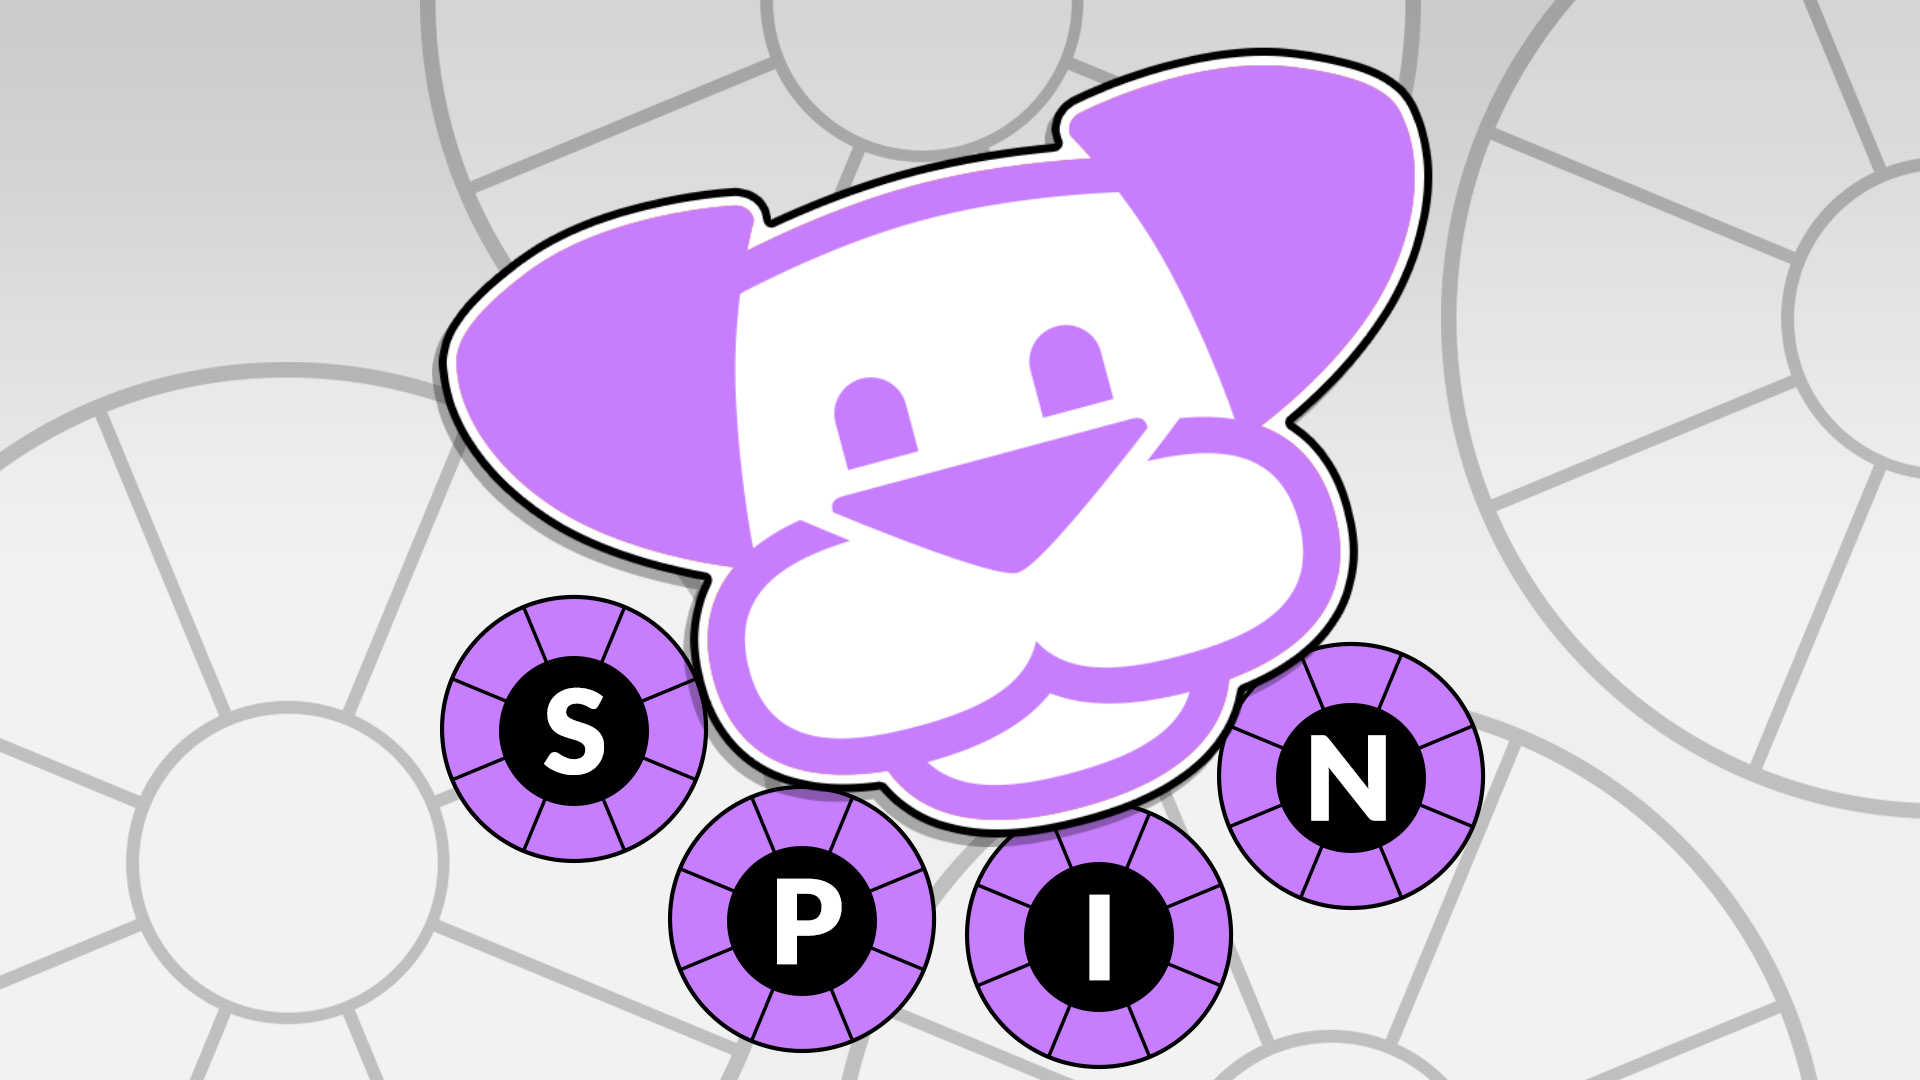 Top Spin